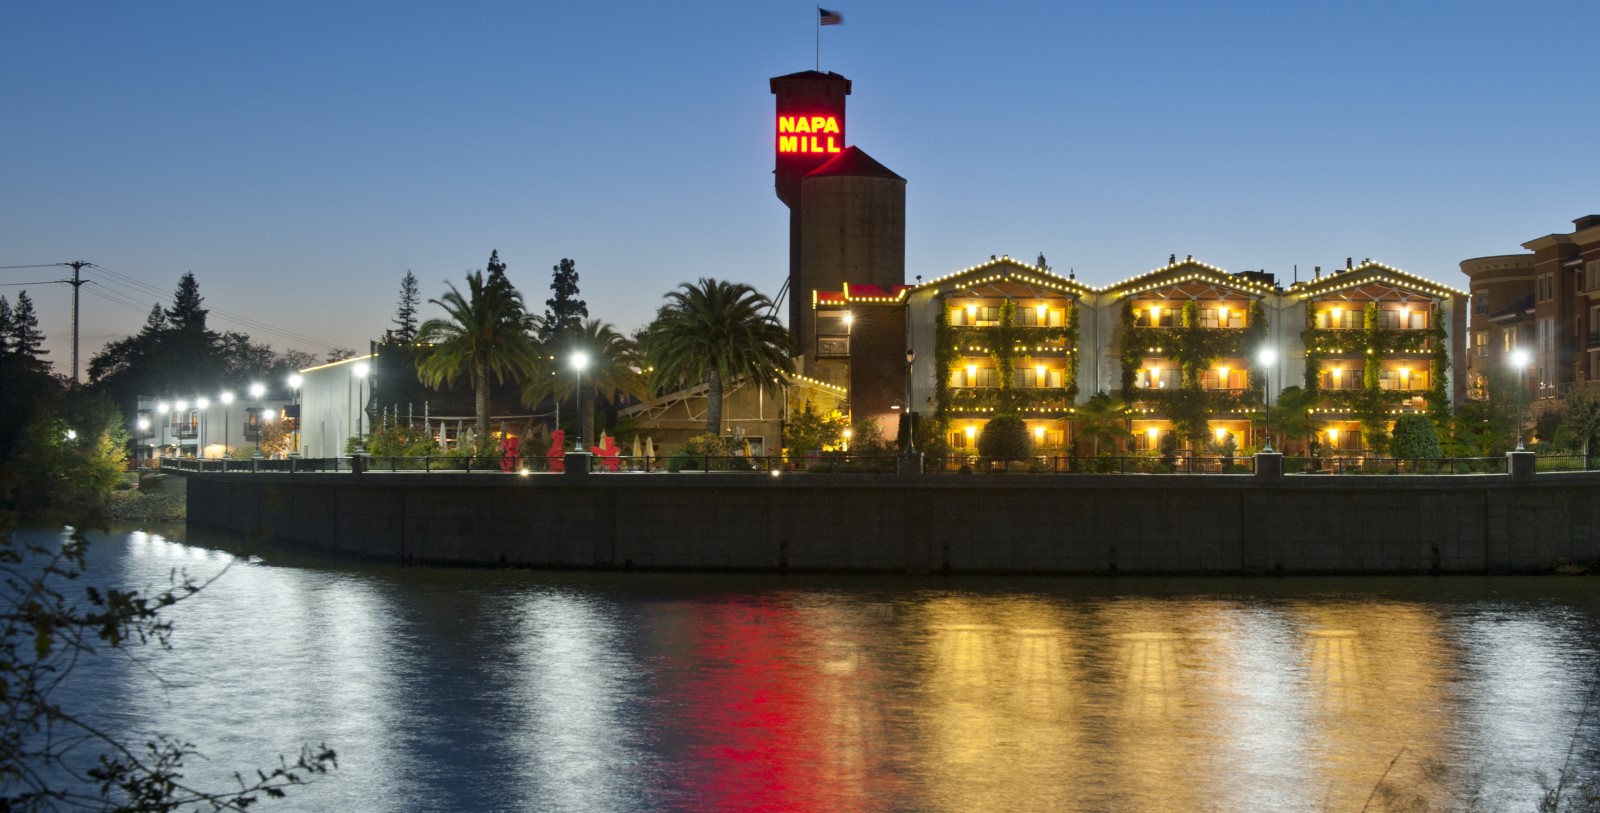 Take a day to discover the shops at the Historic Napa Mill, Skyline Wilderness Park, Oxbow Public Market, and the wineries of nearby St. Helena.